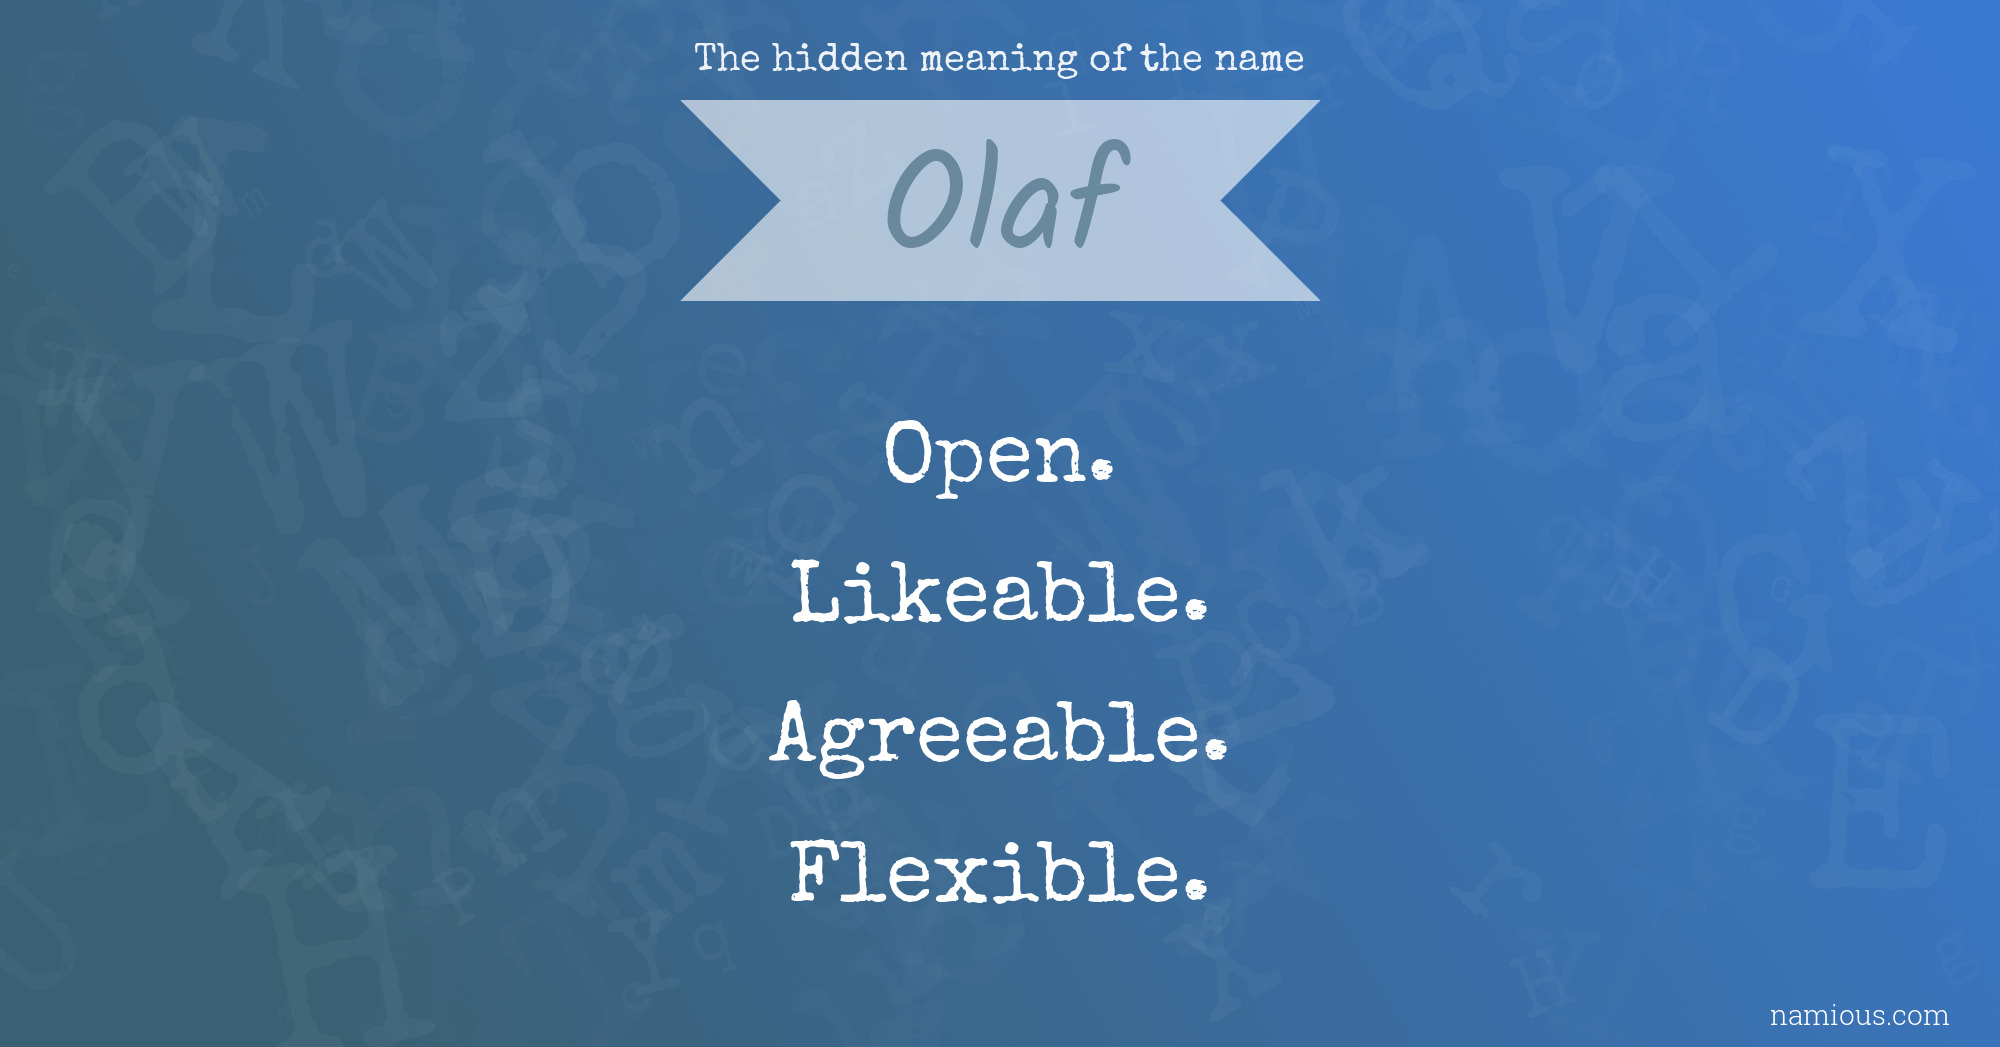 The hidden meaning of the name Olaf